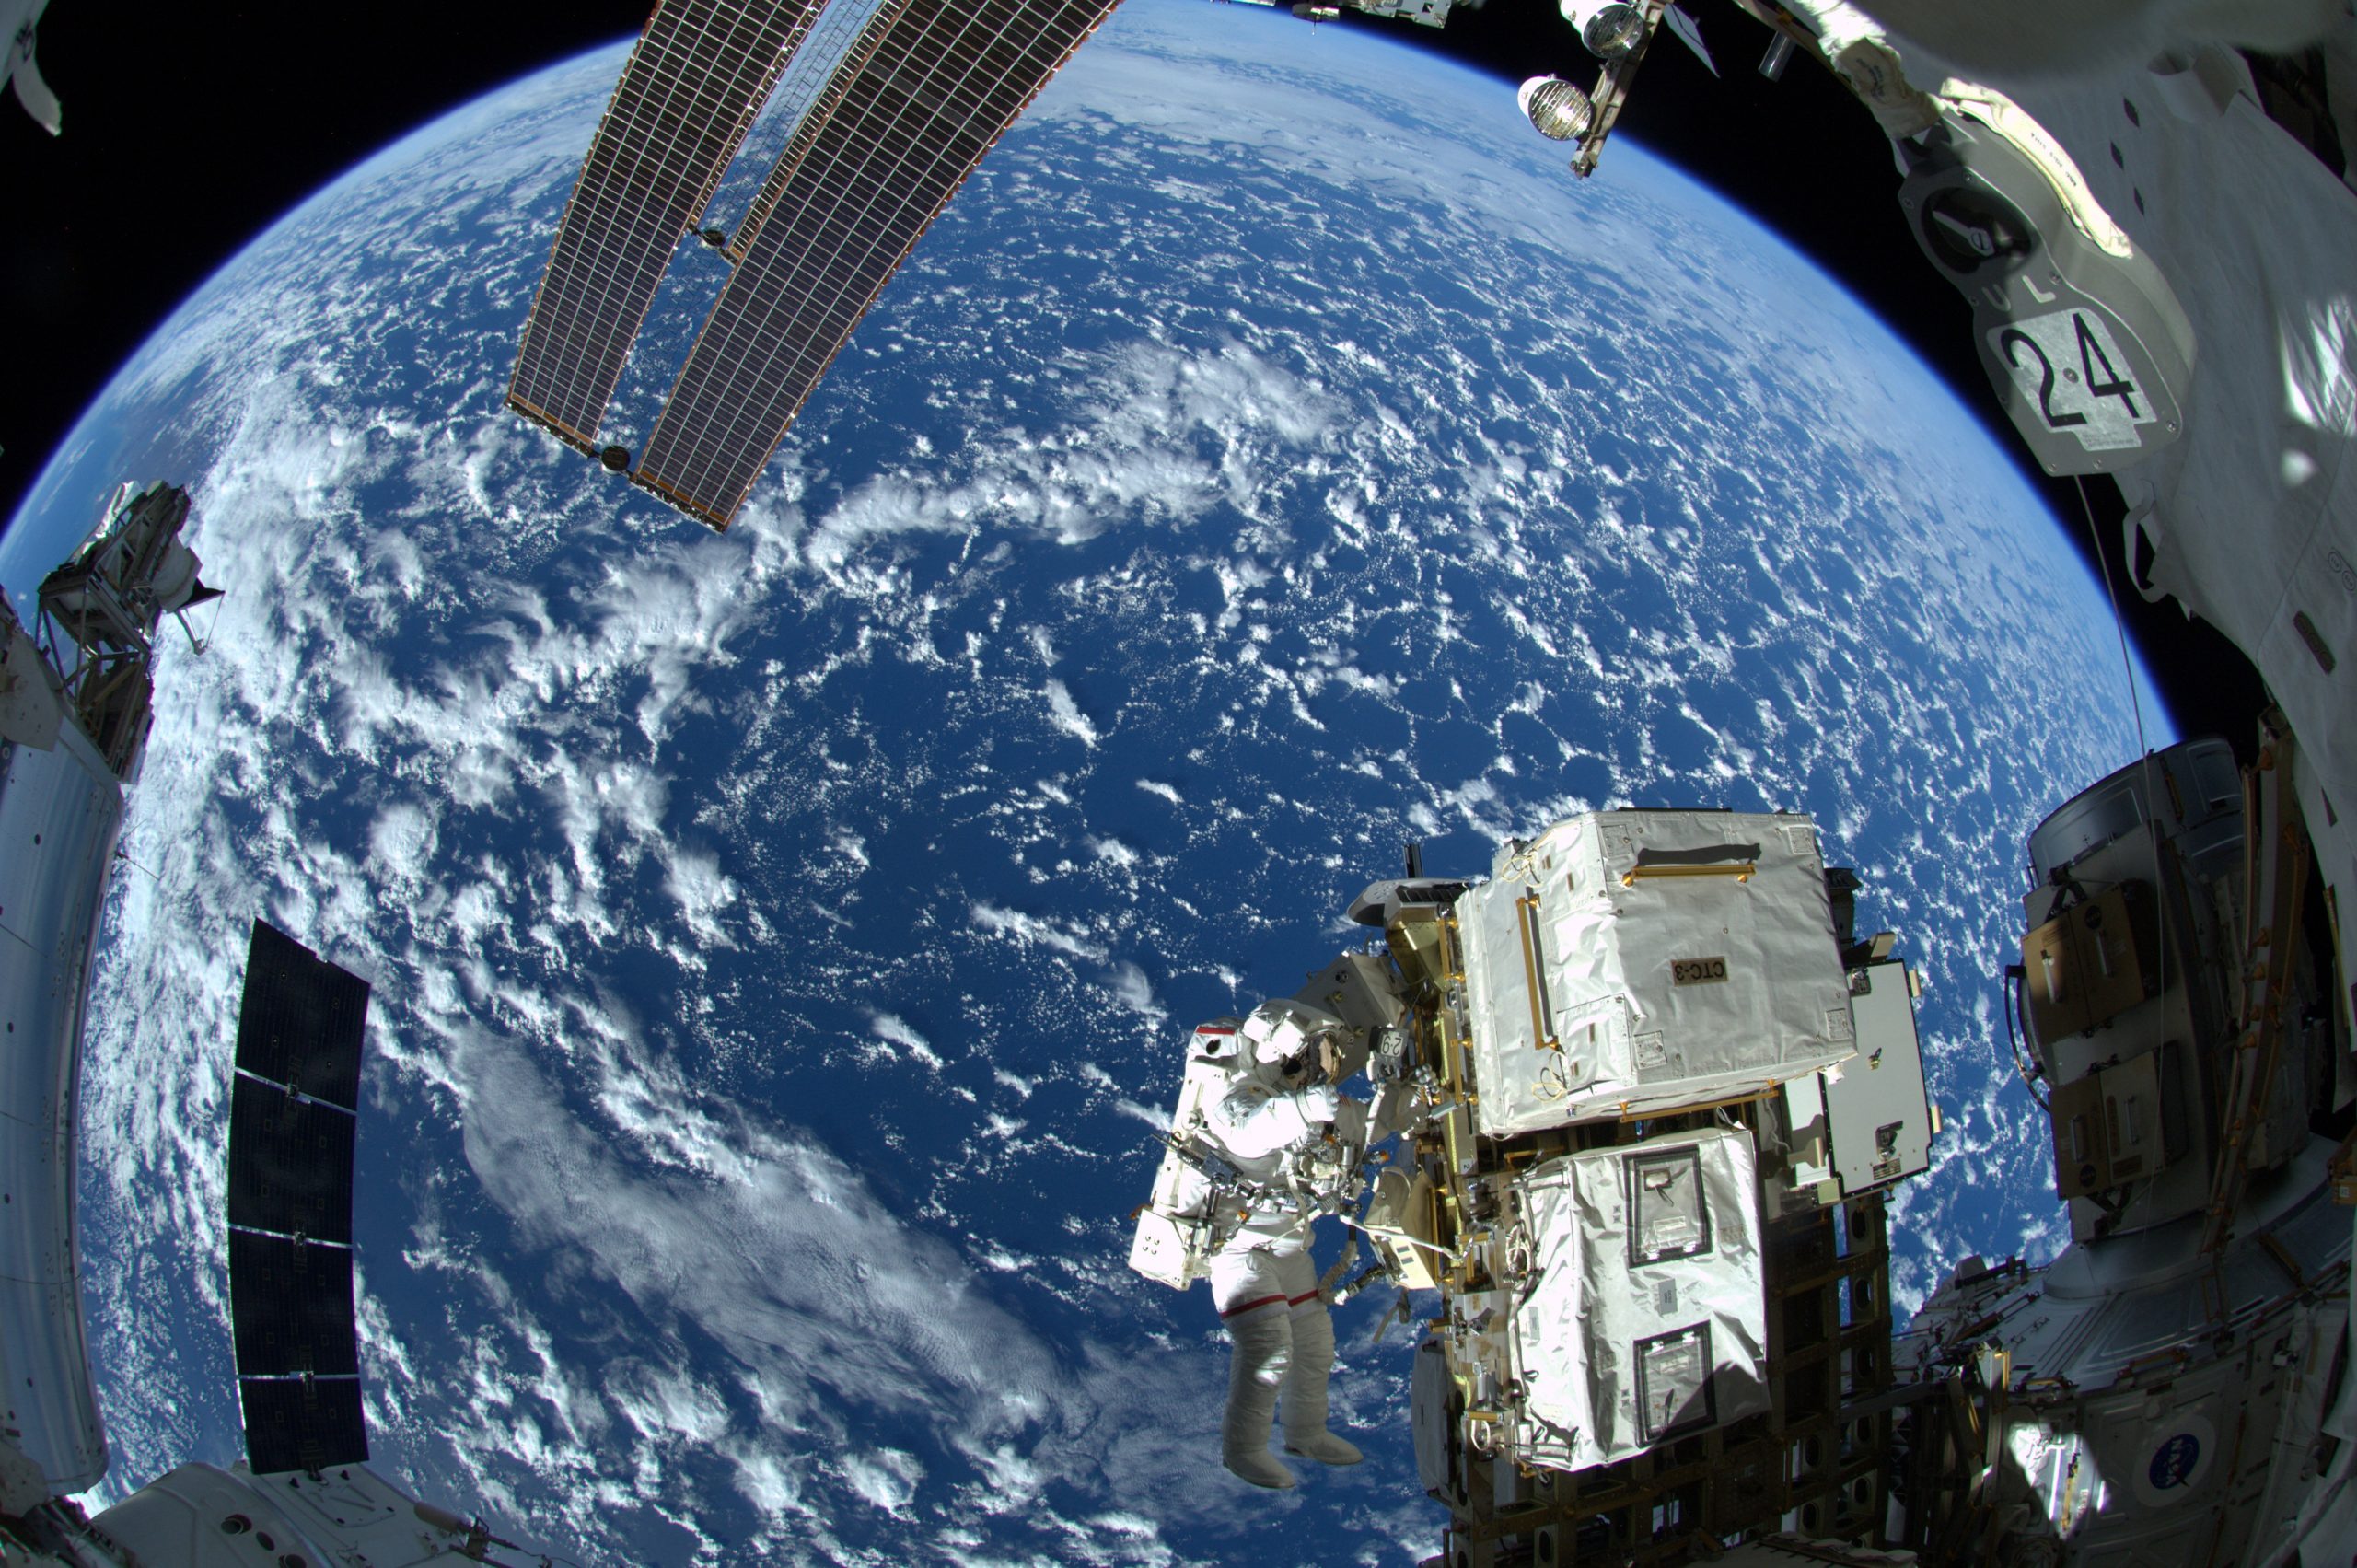 They are looking for ways to return stranded astronauts to Earth